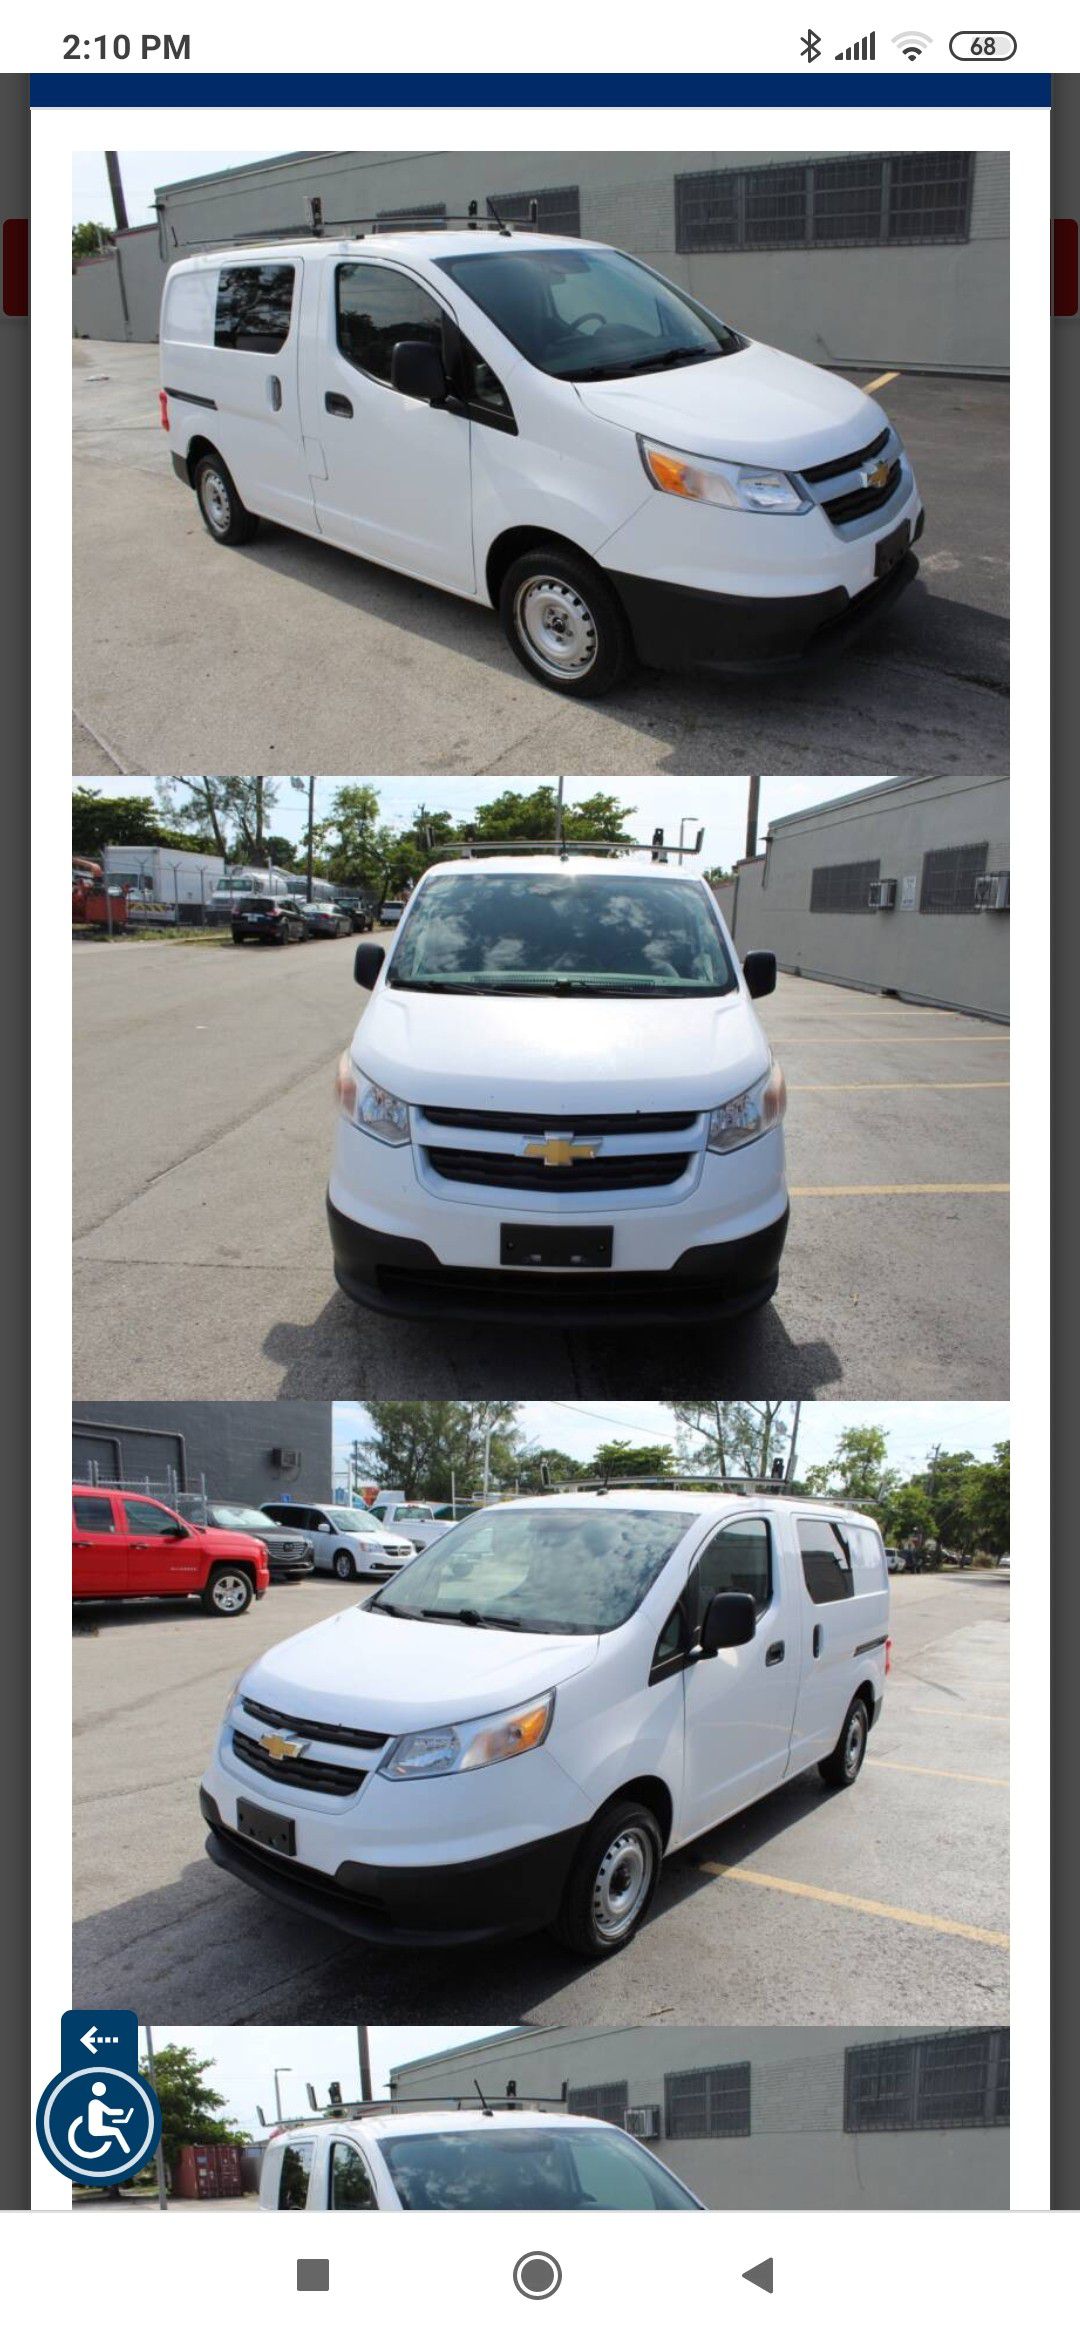 Photo 2016 CHEVROLET CITY VAN AUTO AC ONE OWNER LOW MILES GAS SAVER READY TO WORK FLEET SALES COMMERCIAL FINANCING LENDERS MORE INFO CONTACT OLIVER